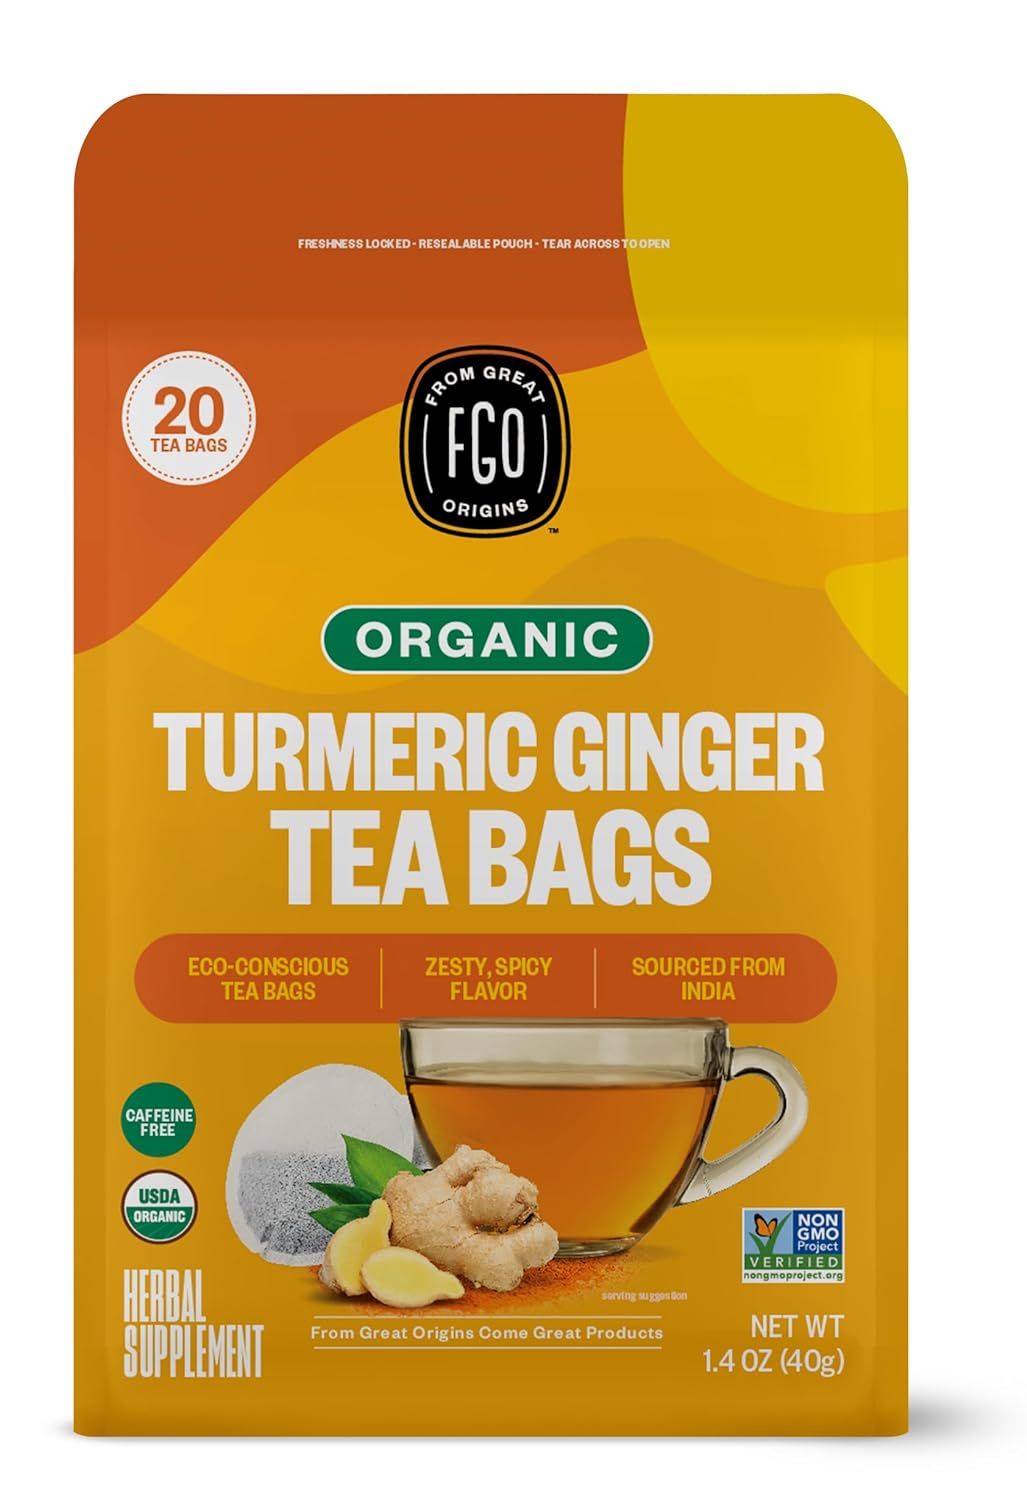 I love these tea bags. I've been buying them for years now. this is my favorite of all teas. the only issue is, the boldness of the flavor is hit or miss. the ginger is supposed to be bold and spicy. hot to the taste. I purchased this bag of 100, and the tea bags are neither spicy or bold. they taste like regular lipton tea bags. I also purchased a bag of 20, and they are PERFECT! spicy and full-bodied. so just know when purchasing this item, you may get spicy in one order and bland in the other.